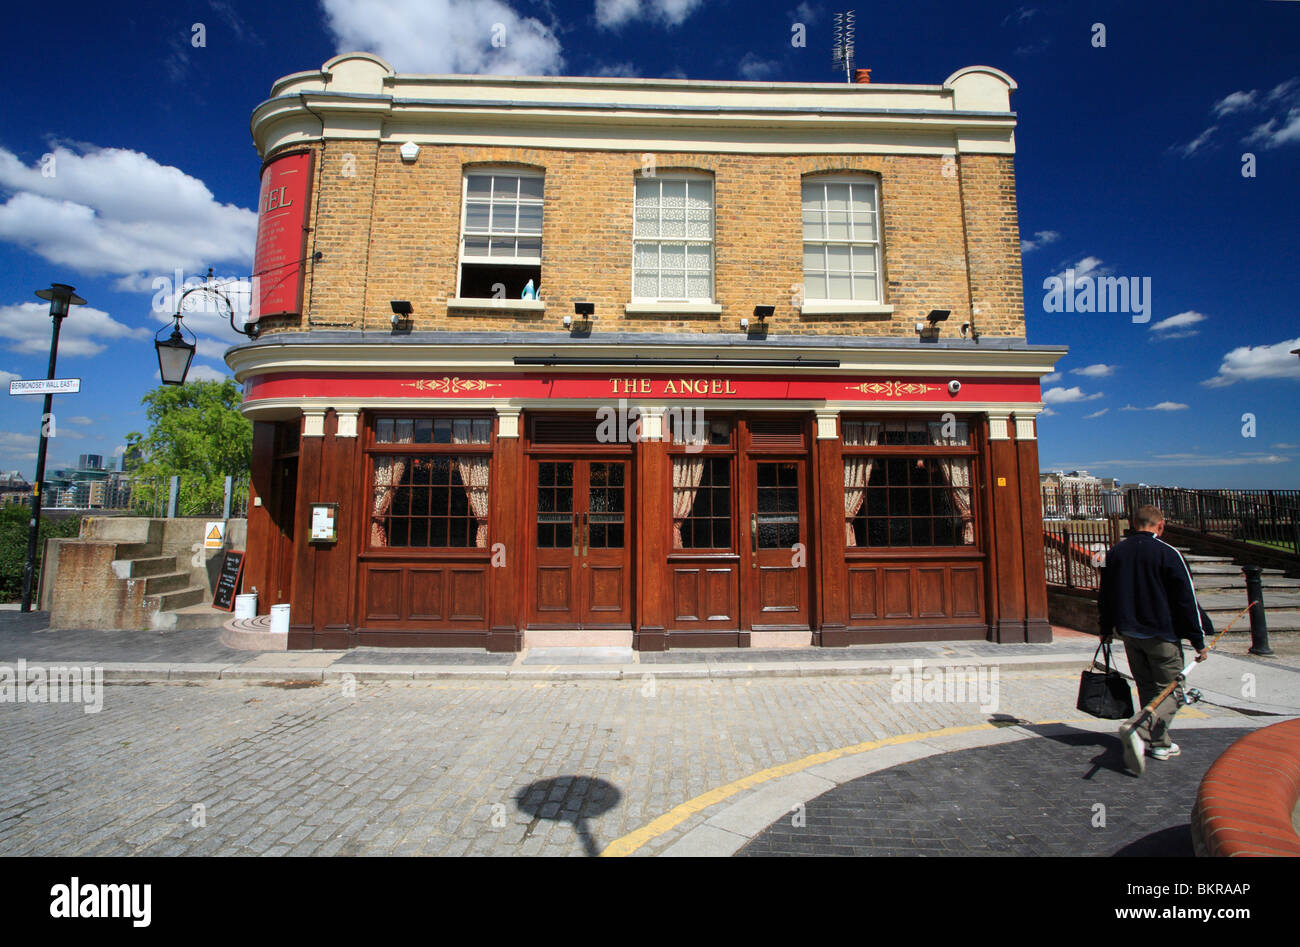 The Angel PH, Bermondsey Wall East, London. A river side pub with a fisherman walking past Stock Photo